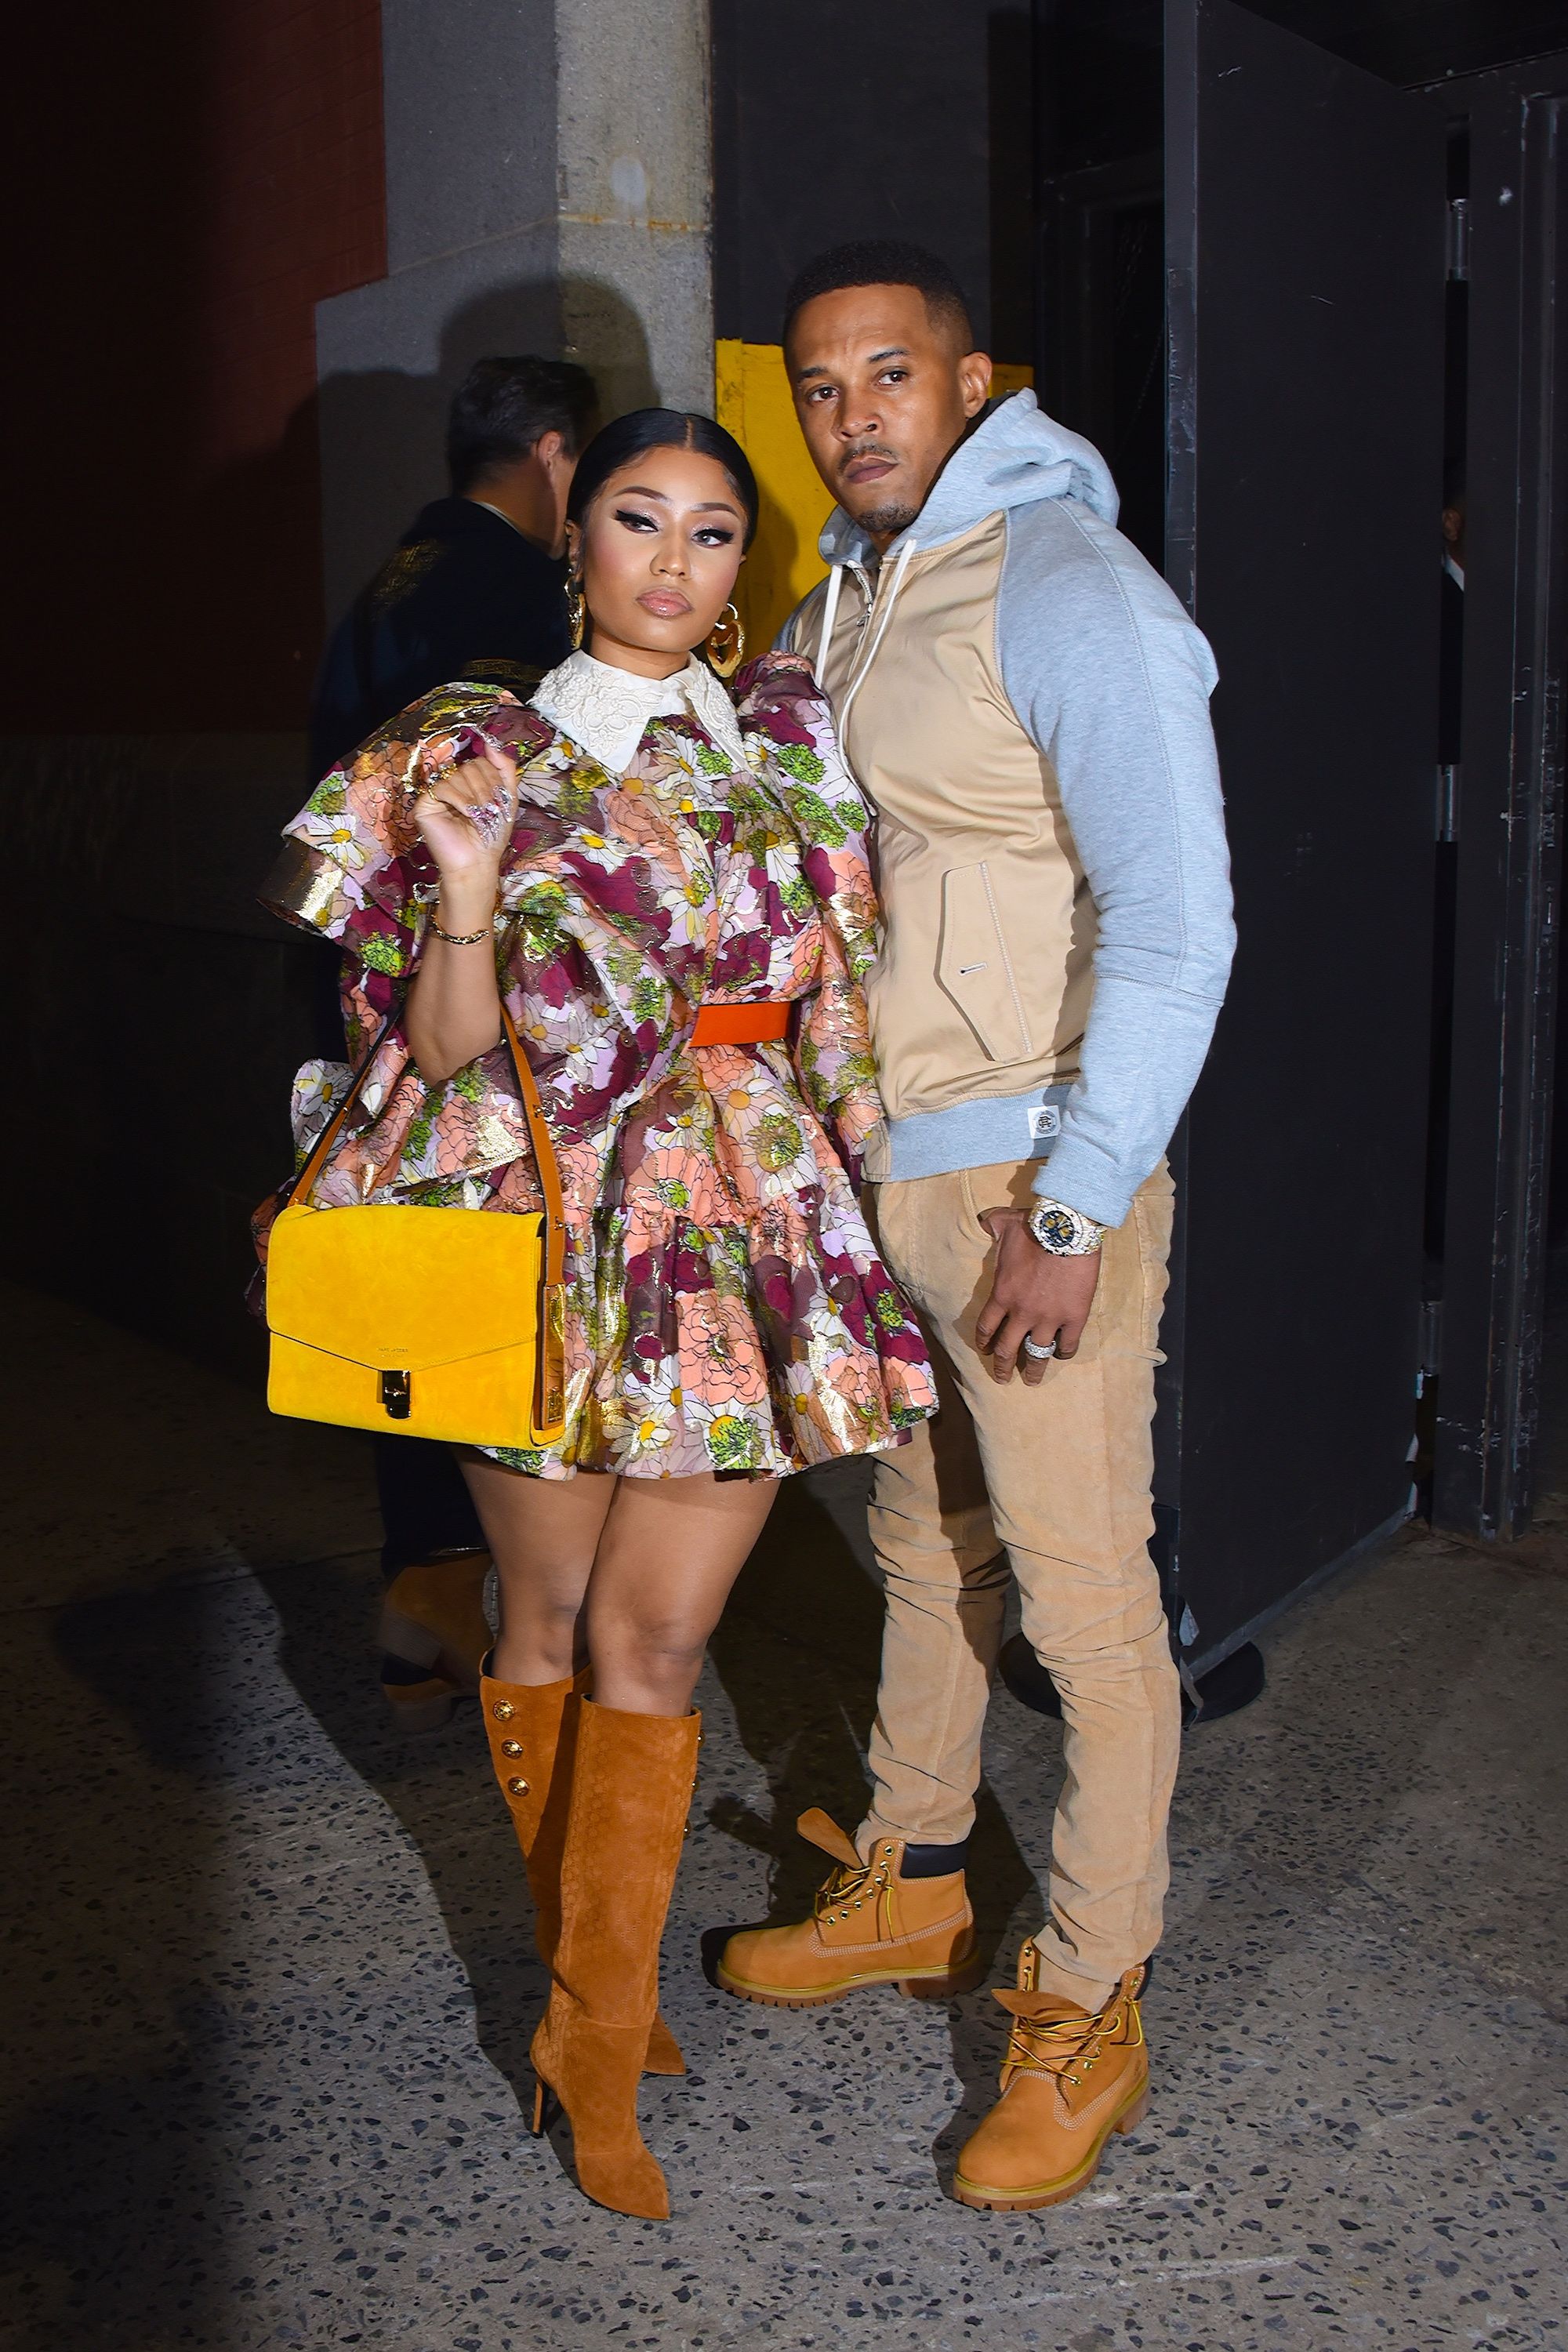 Nicki Minaj and husband Kenneth Petty seen at a Marc Jacobs NYFW event in Manhattan on February 12, 2020, in New York City. | Photo: Robert Kamau/GC Images/Getty Images